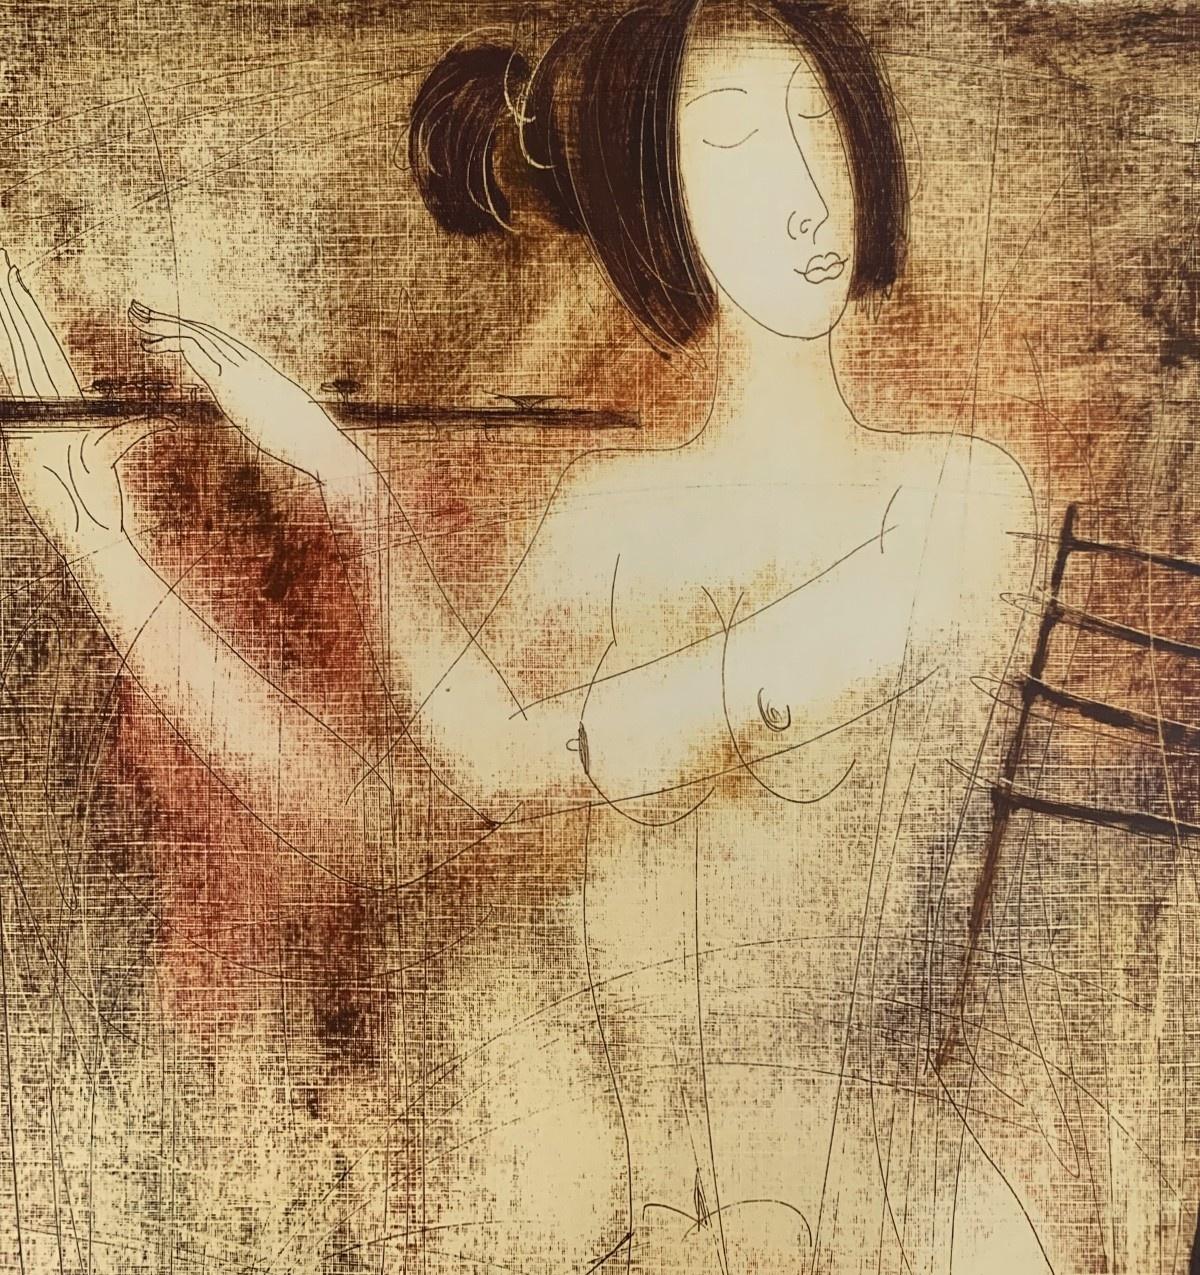 Contemporary figurative nude monotype print by Belarussian artist, Siergiej Timochow. Print depicts a woman playing on a flute. The composition is monochromatic. The paper/cardboard is textured. 

Siergiej Timochow (b. in 1960)
He studied at an art